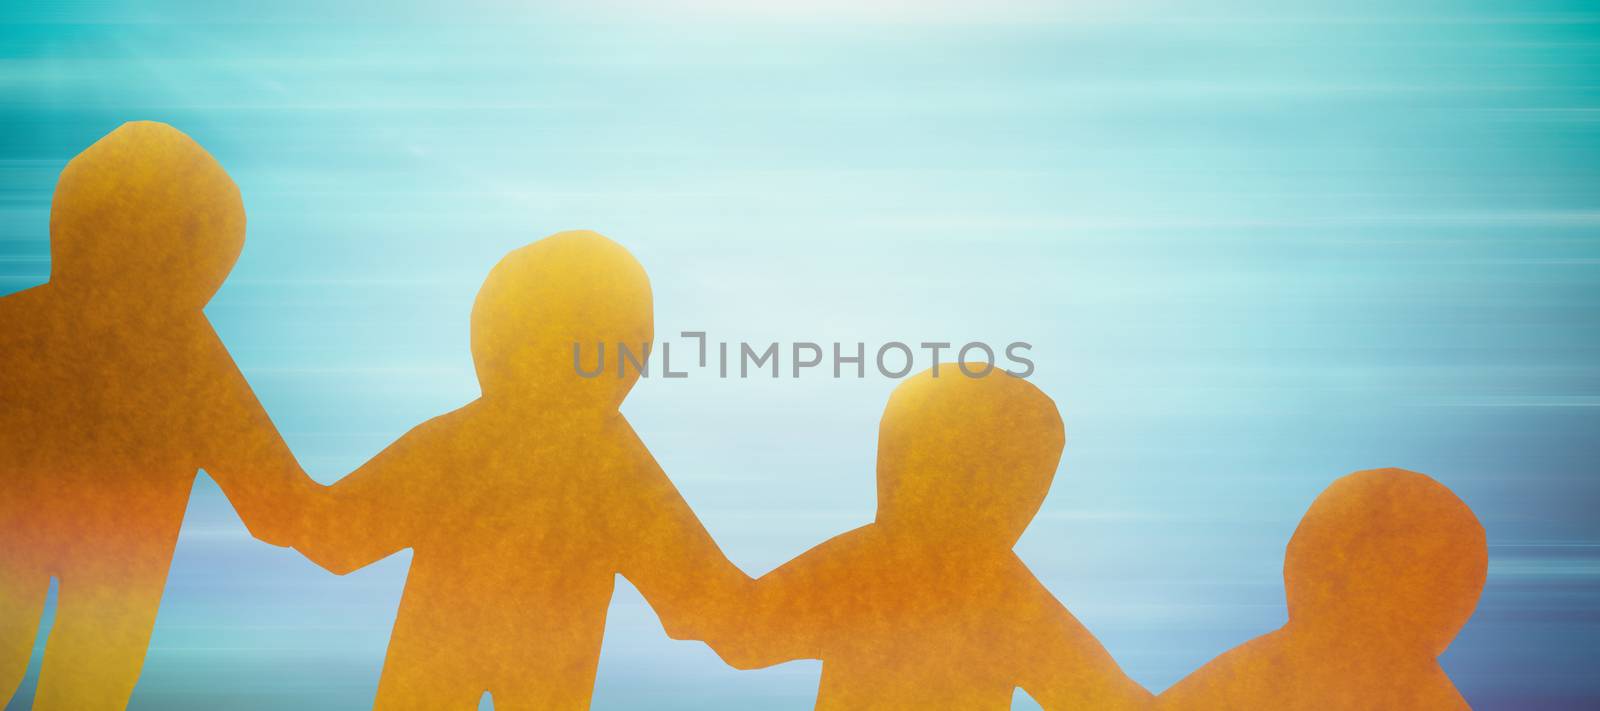 Composite image of little yellow person by Wavebreakmedia